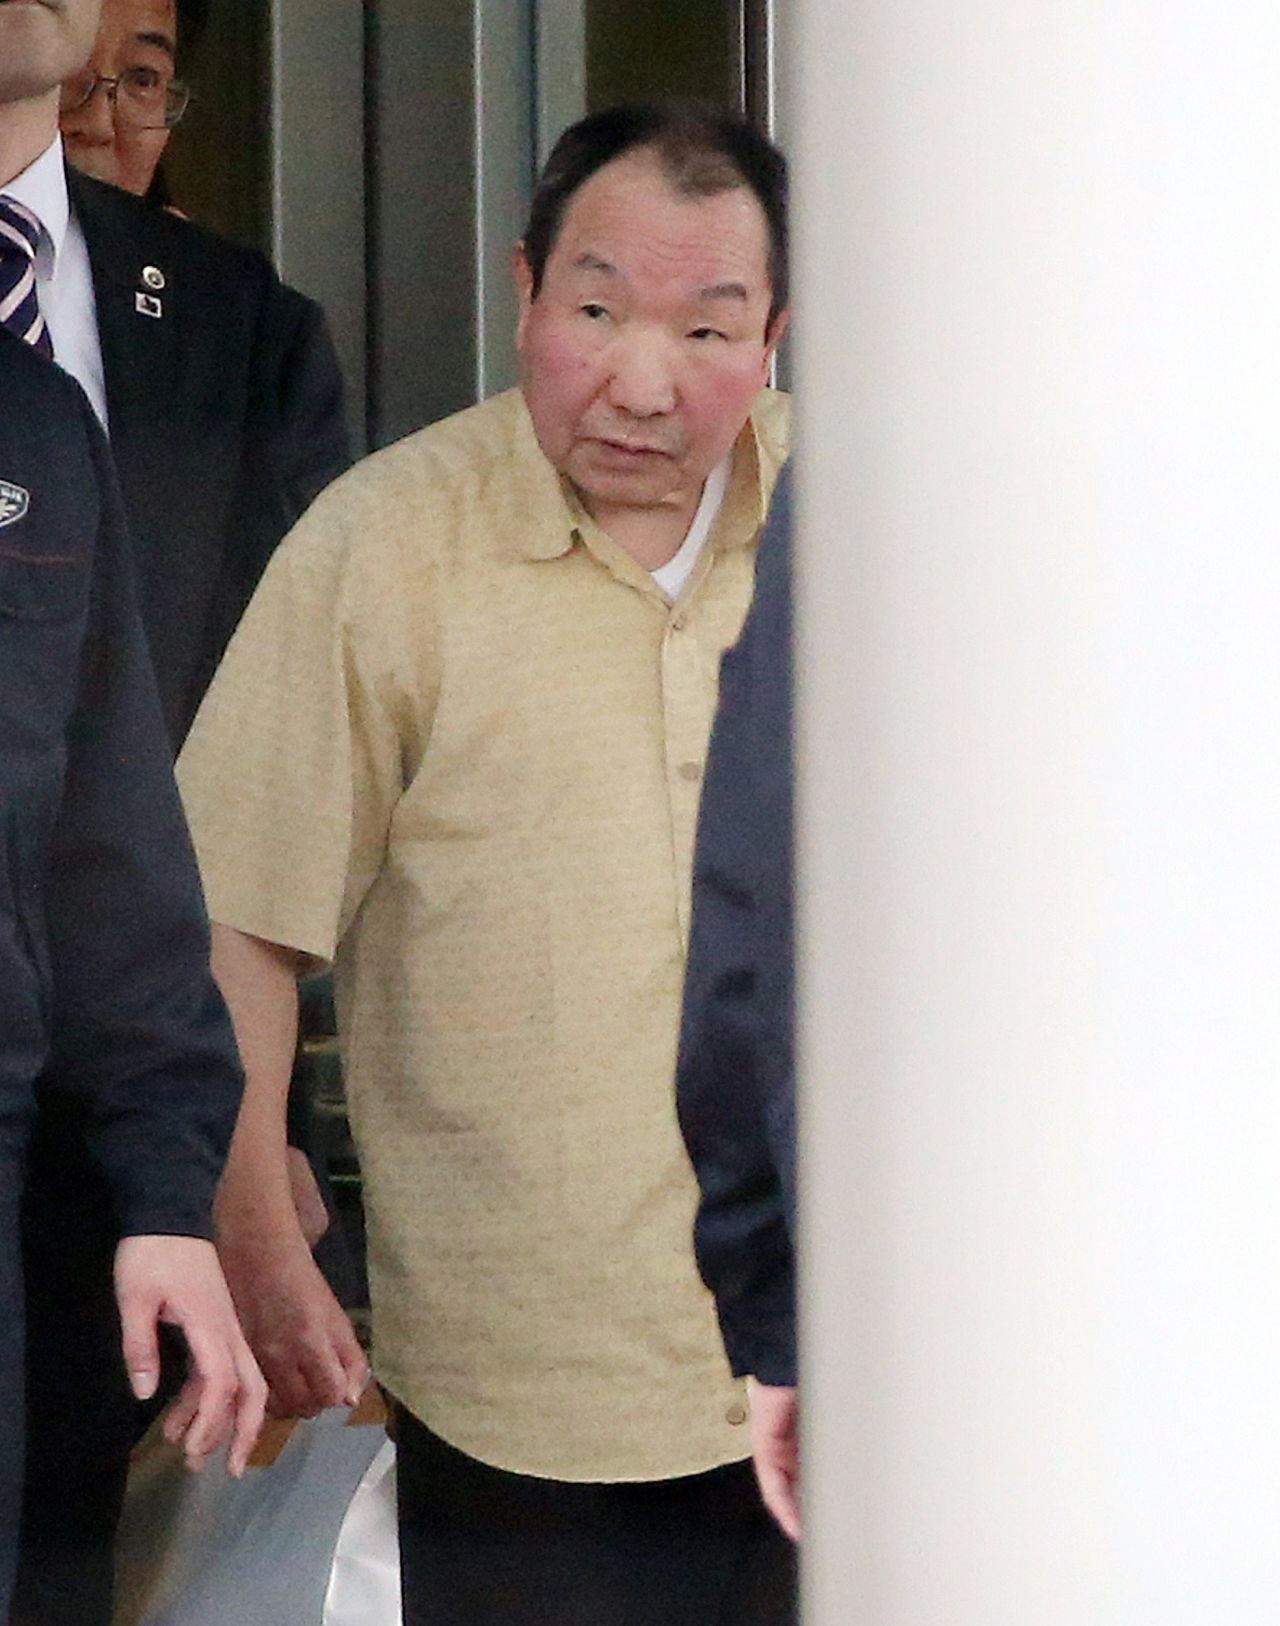 Iwao Hakamada leaves a detention center in Tokyo on Thursday, March 27. Hakamada was convicted of a quadruple murder in 1966, but his death sentence was suspended after DNA testing indicated key evidence against him may have been fabricated, reported NHK, the Japanese public broadcasting organization.